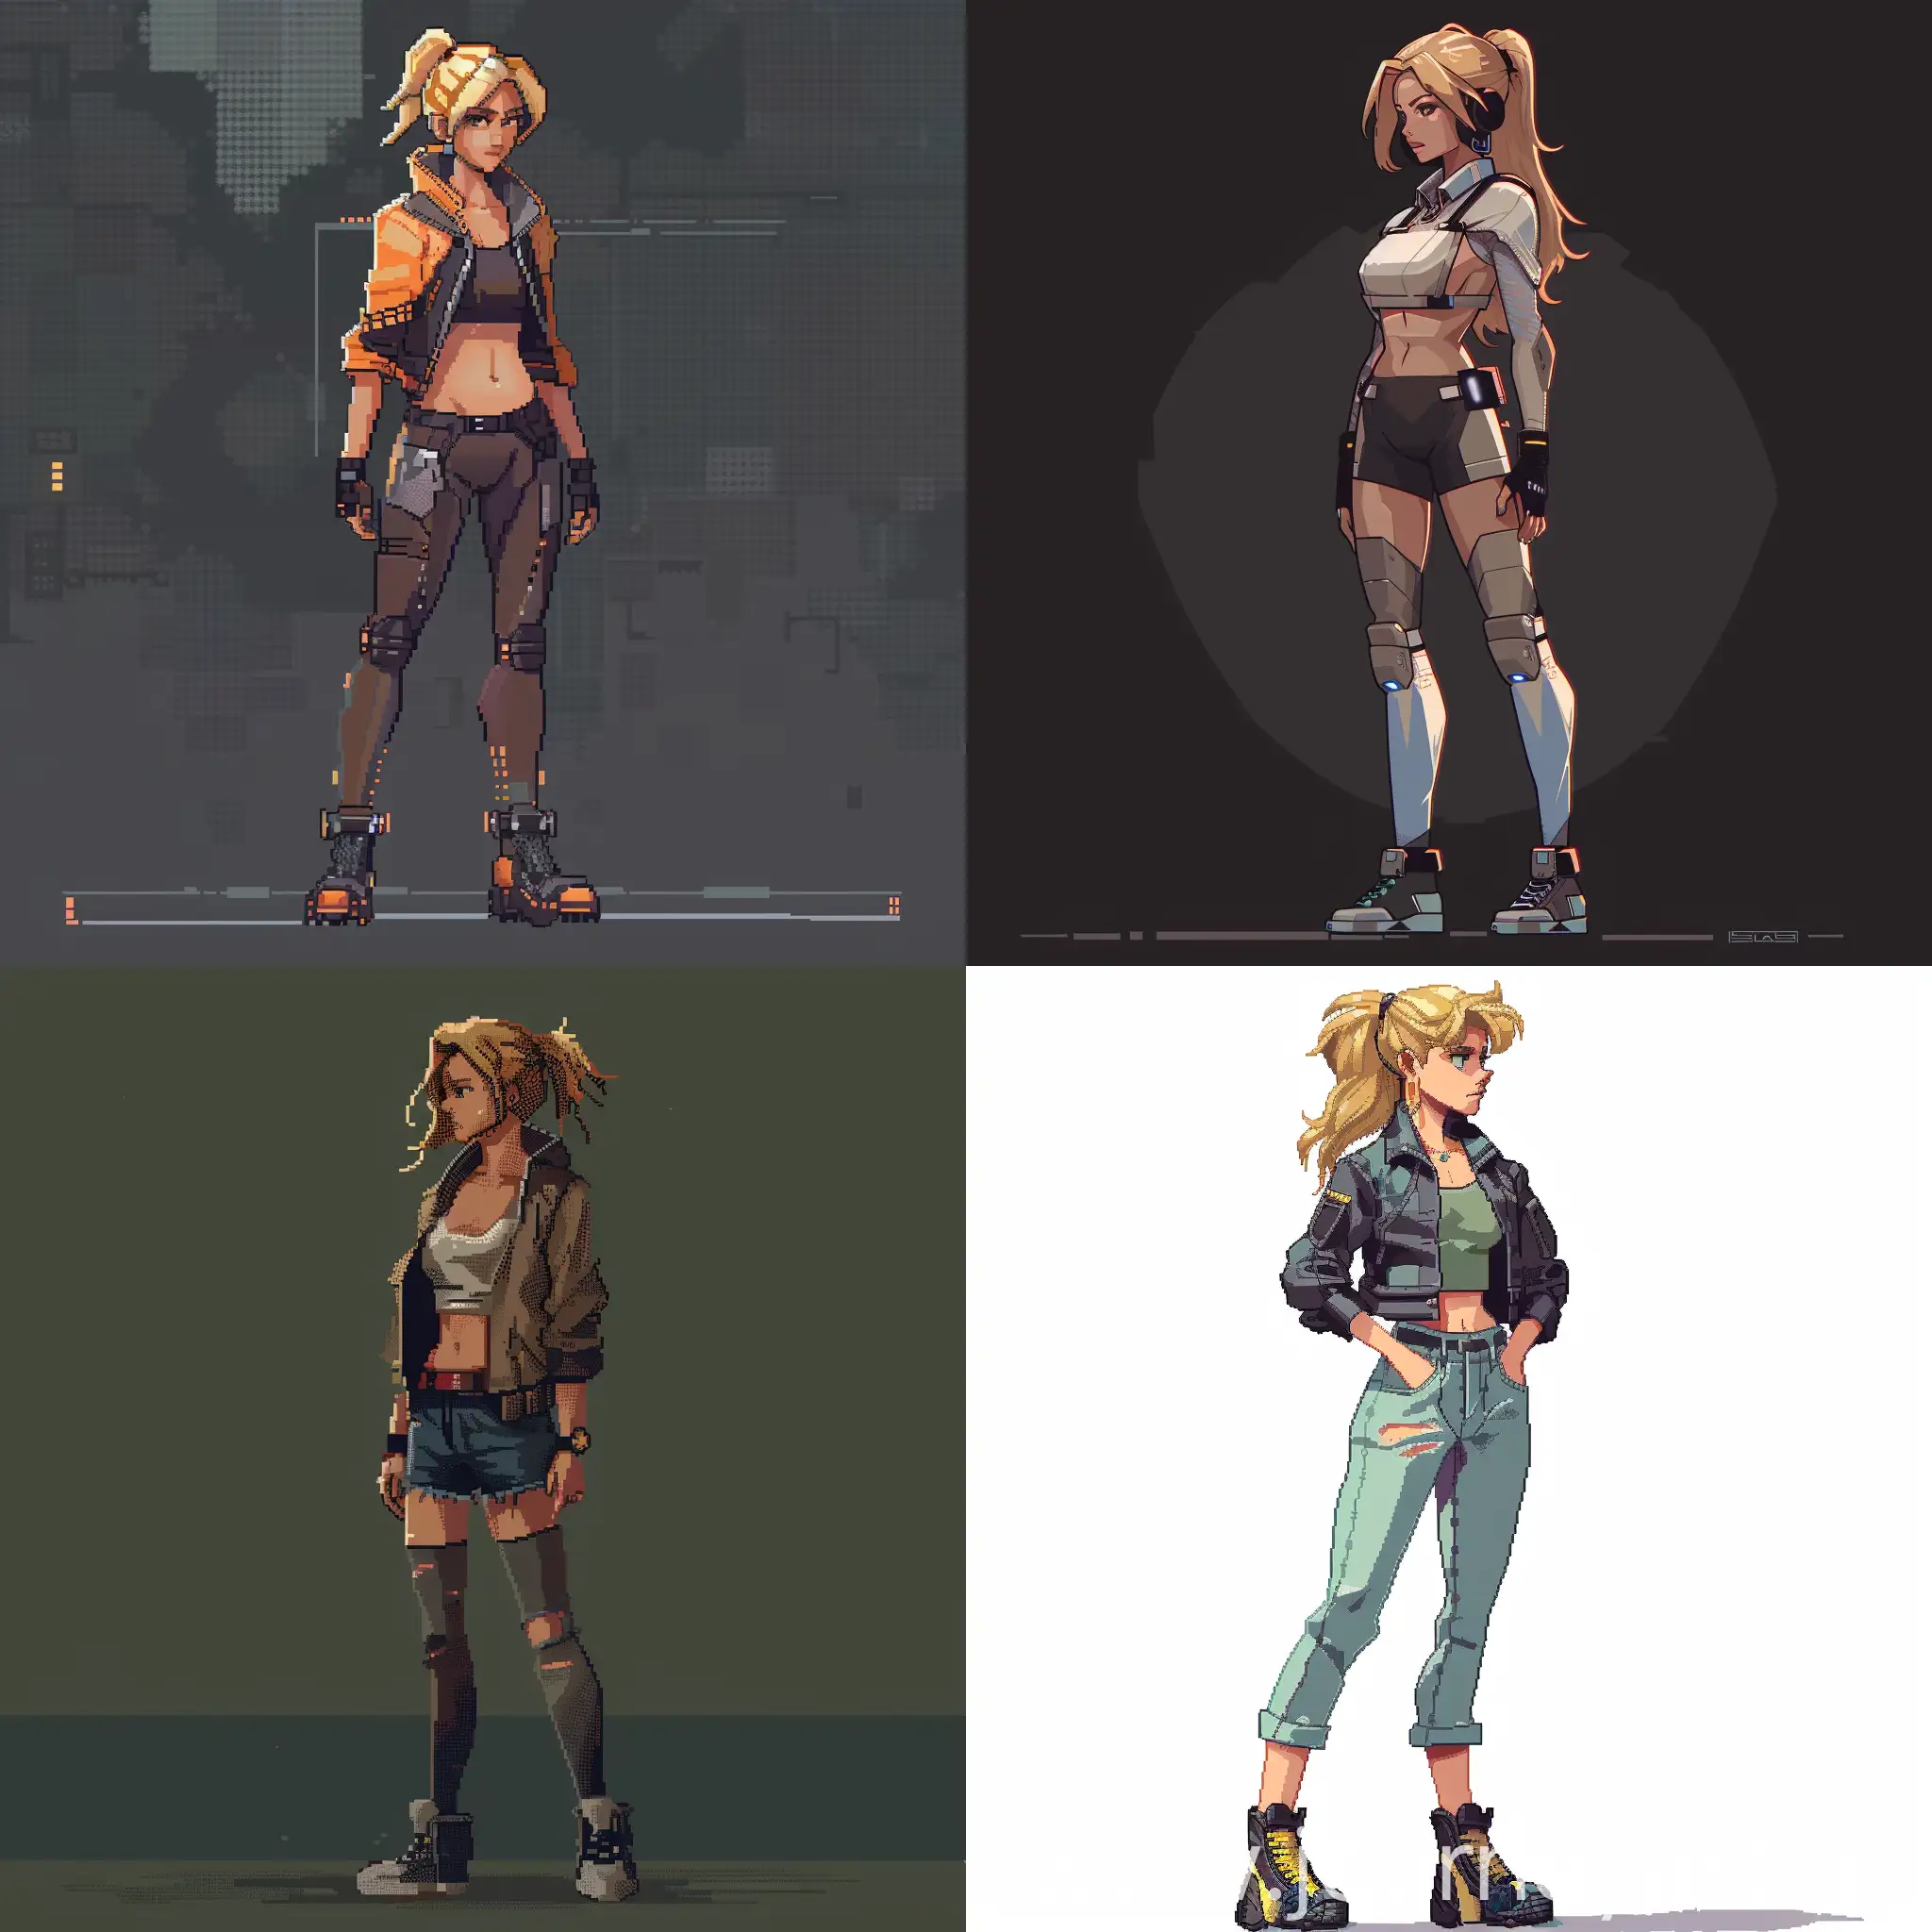 Futuristic-Blond-Game-Character-in-Detailed-Pixel-Art-Style